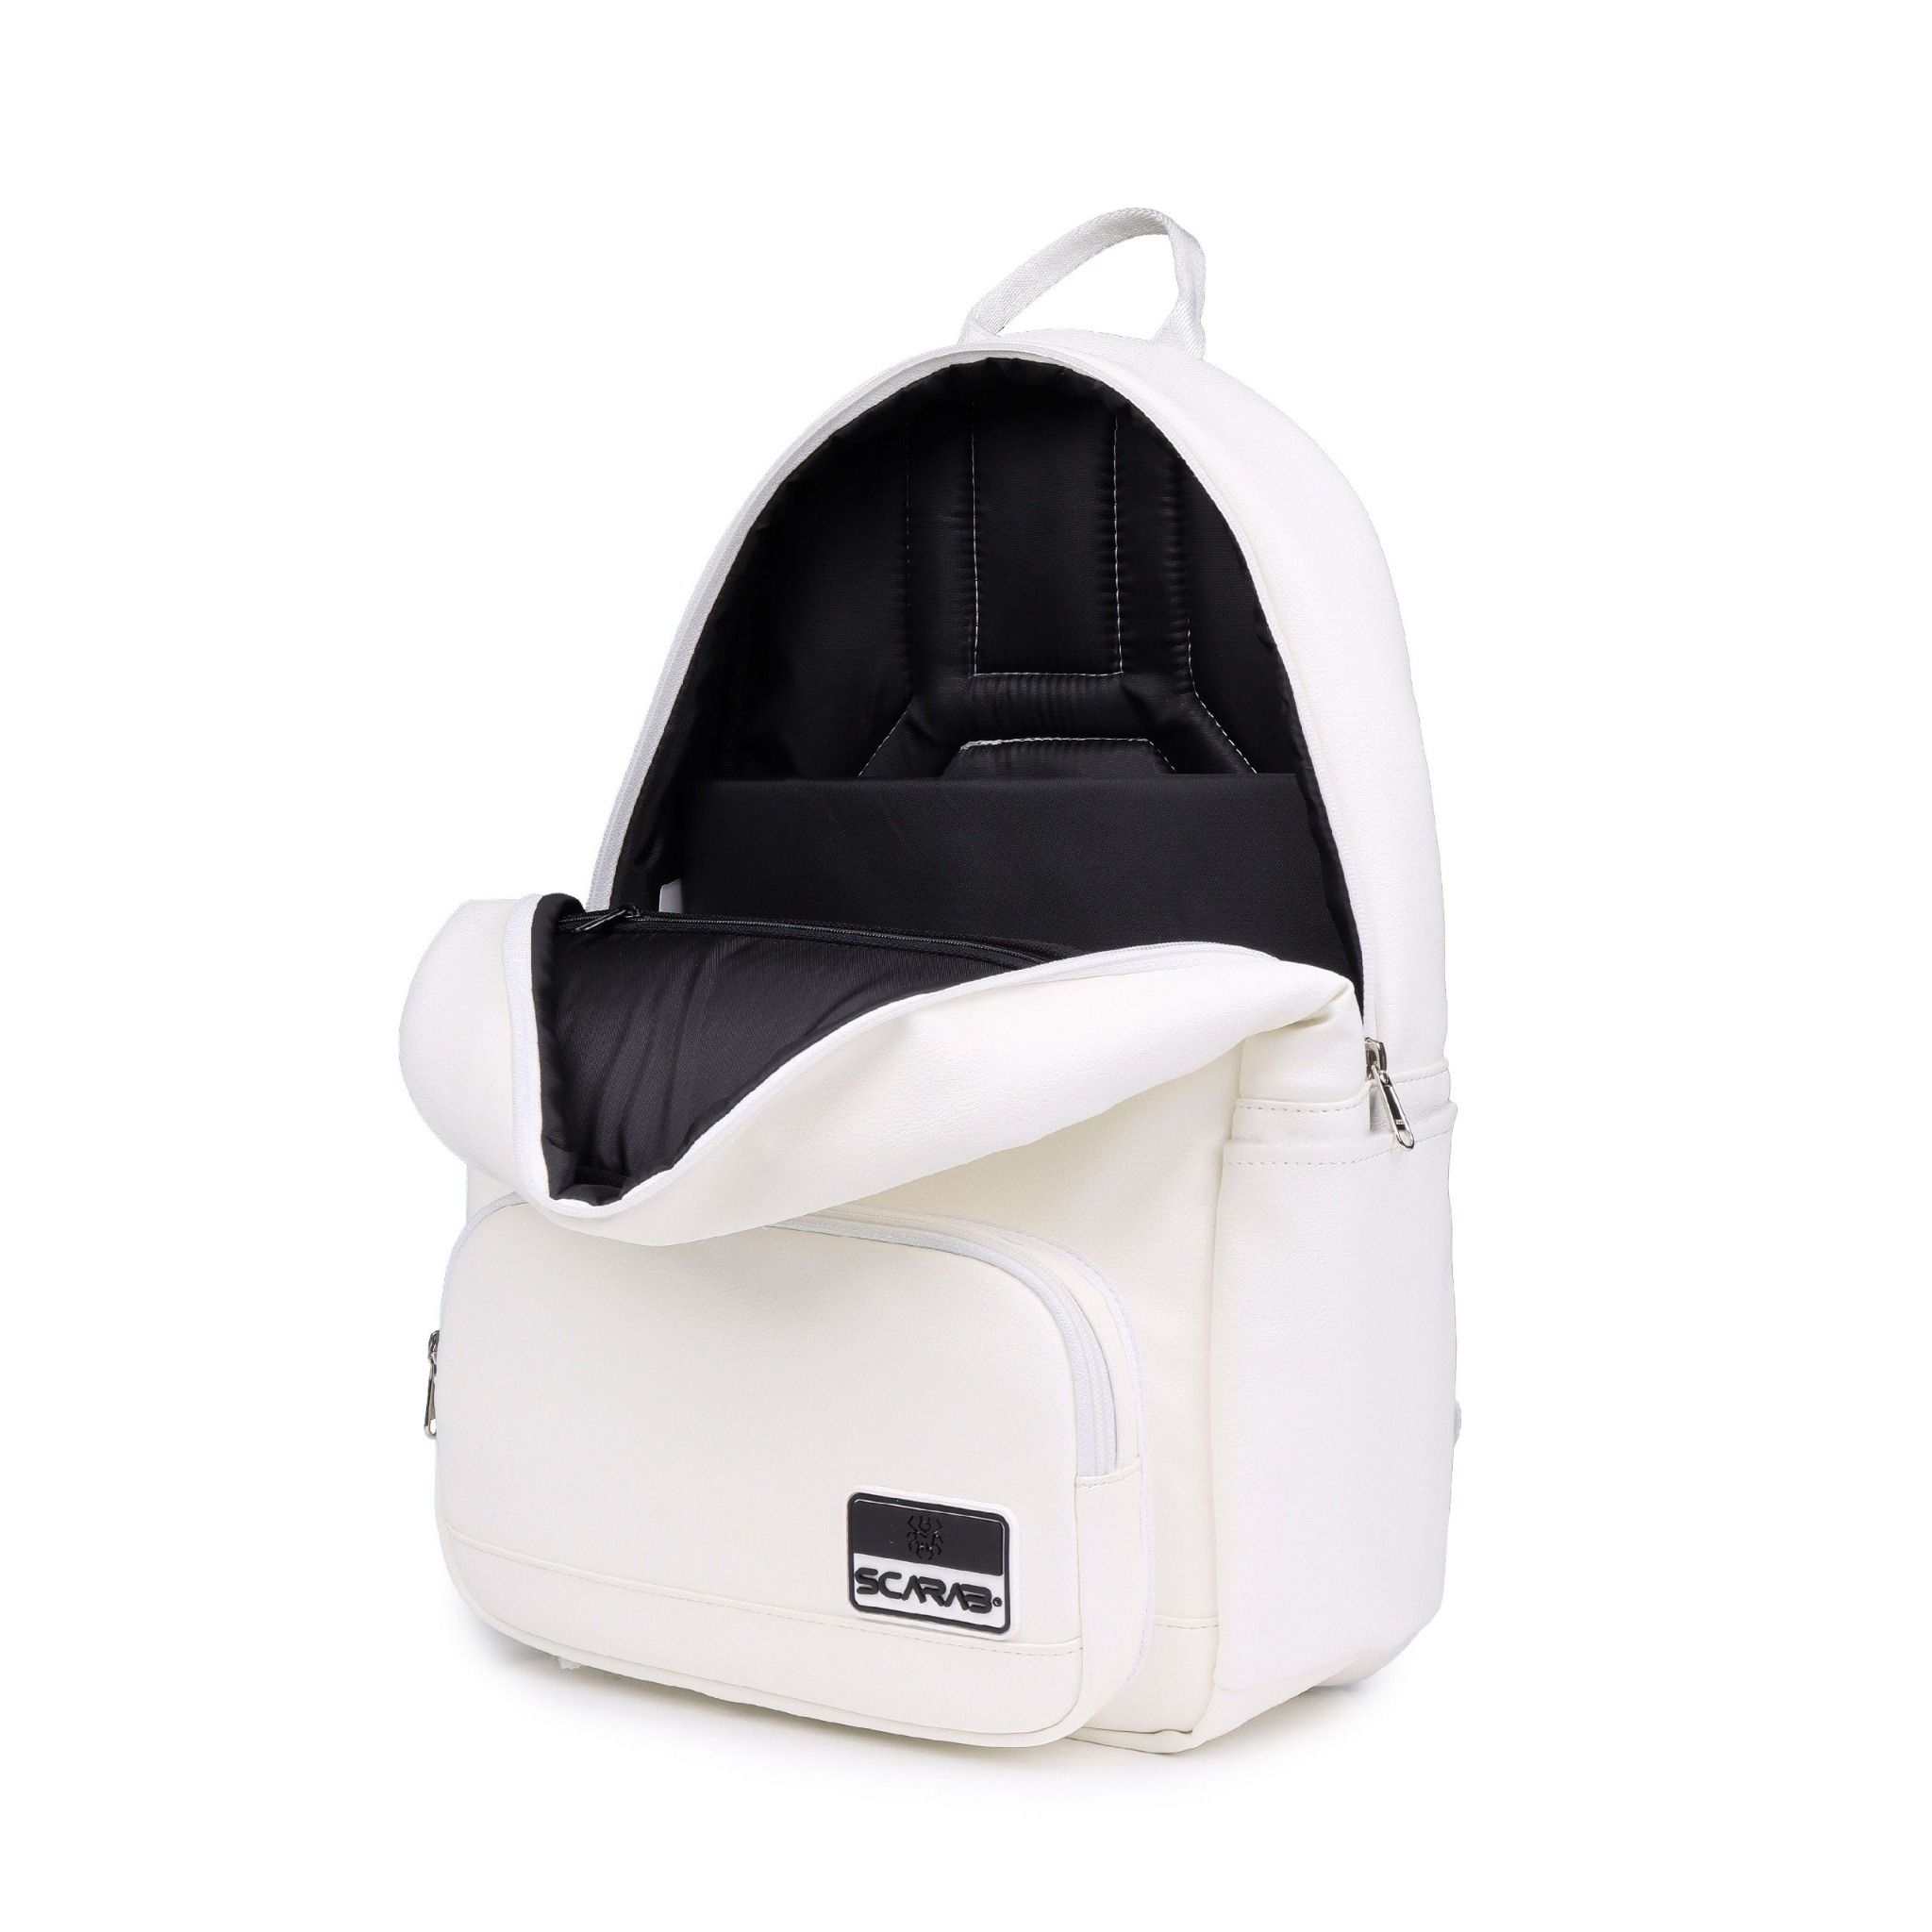  Heritage Backpack - White 